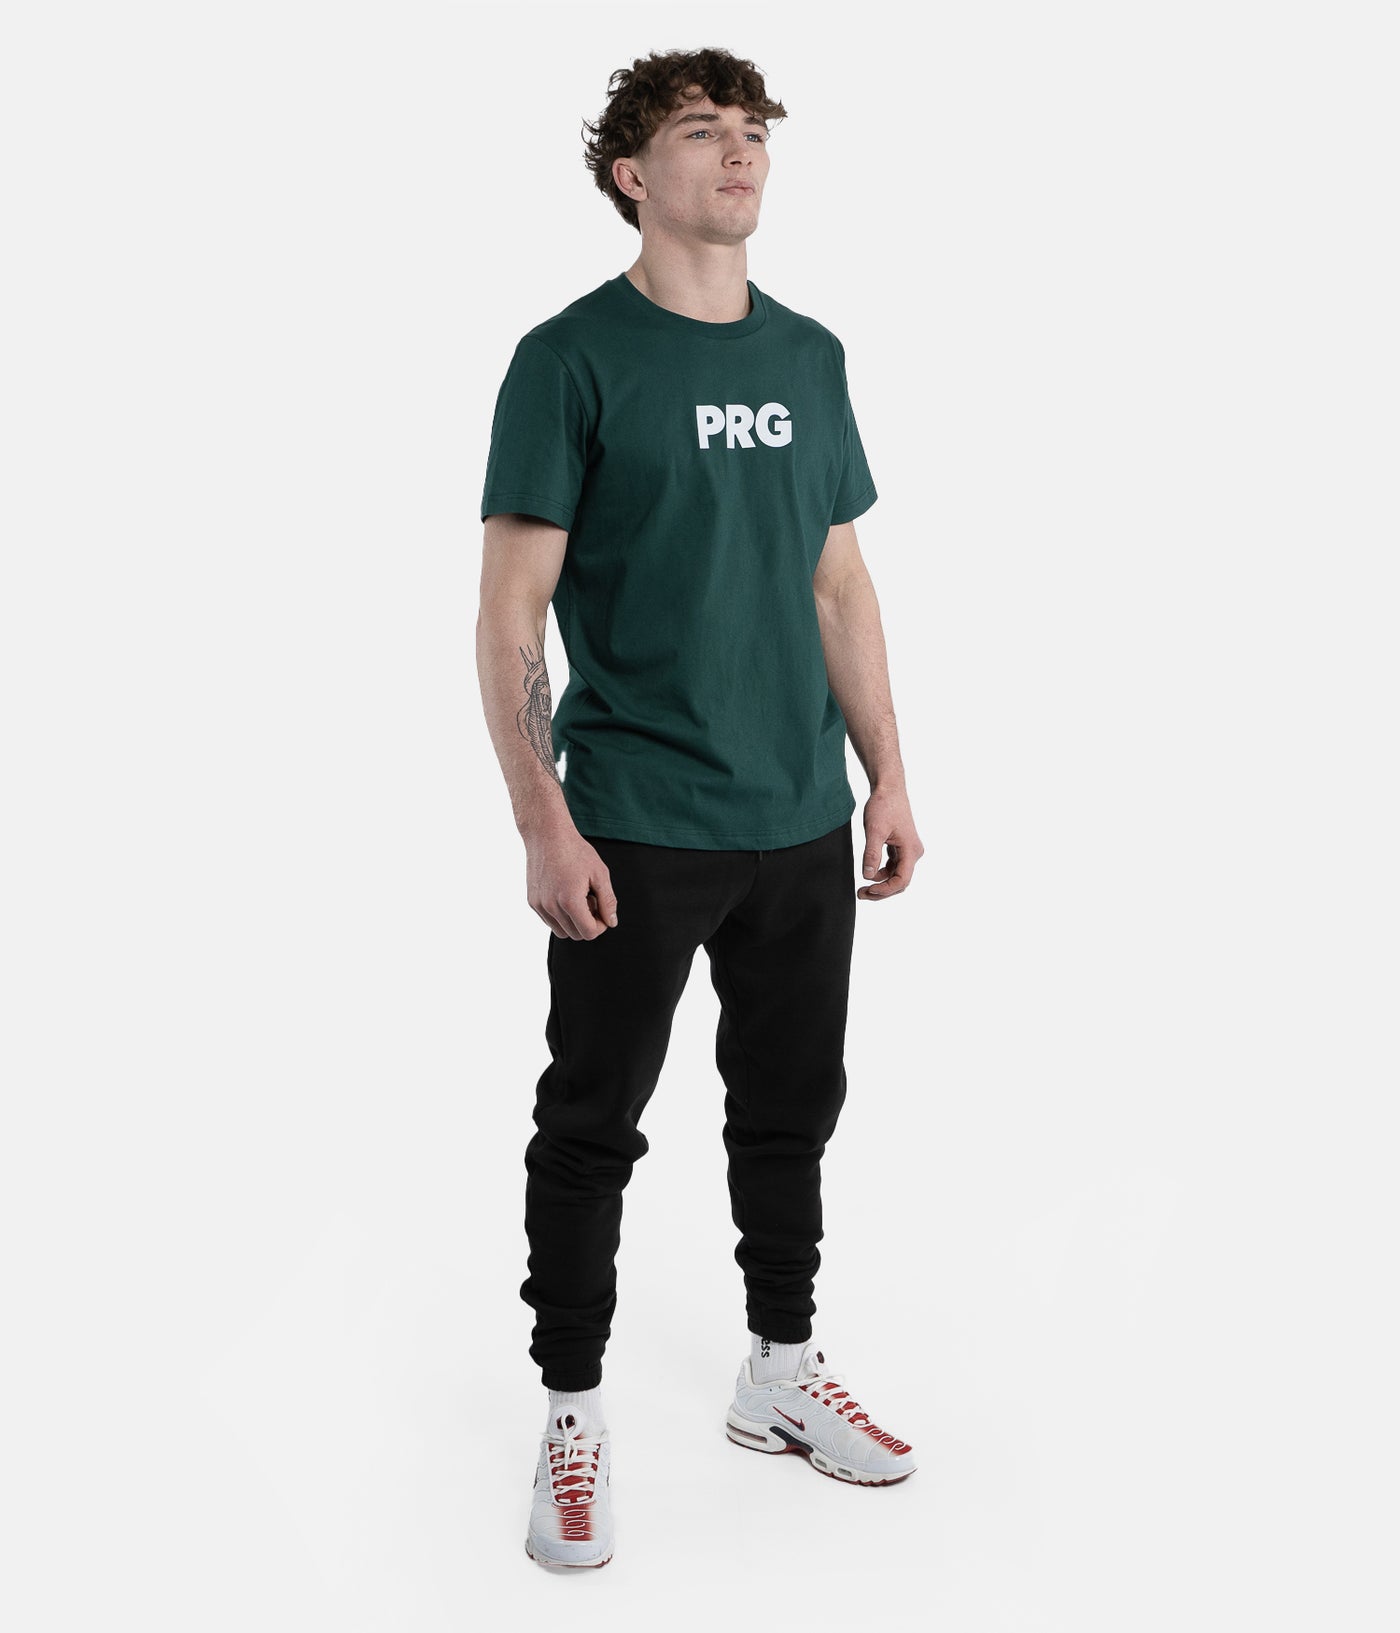 Why choose a PRG Tee?